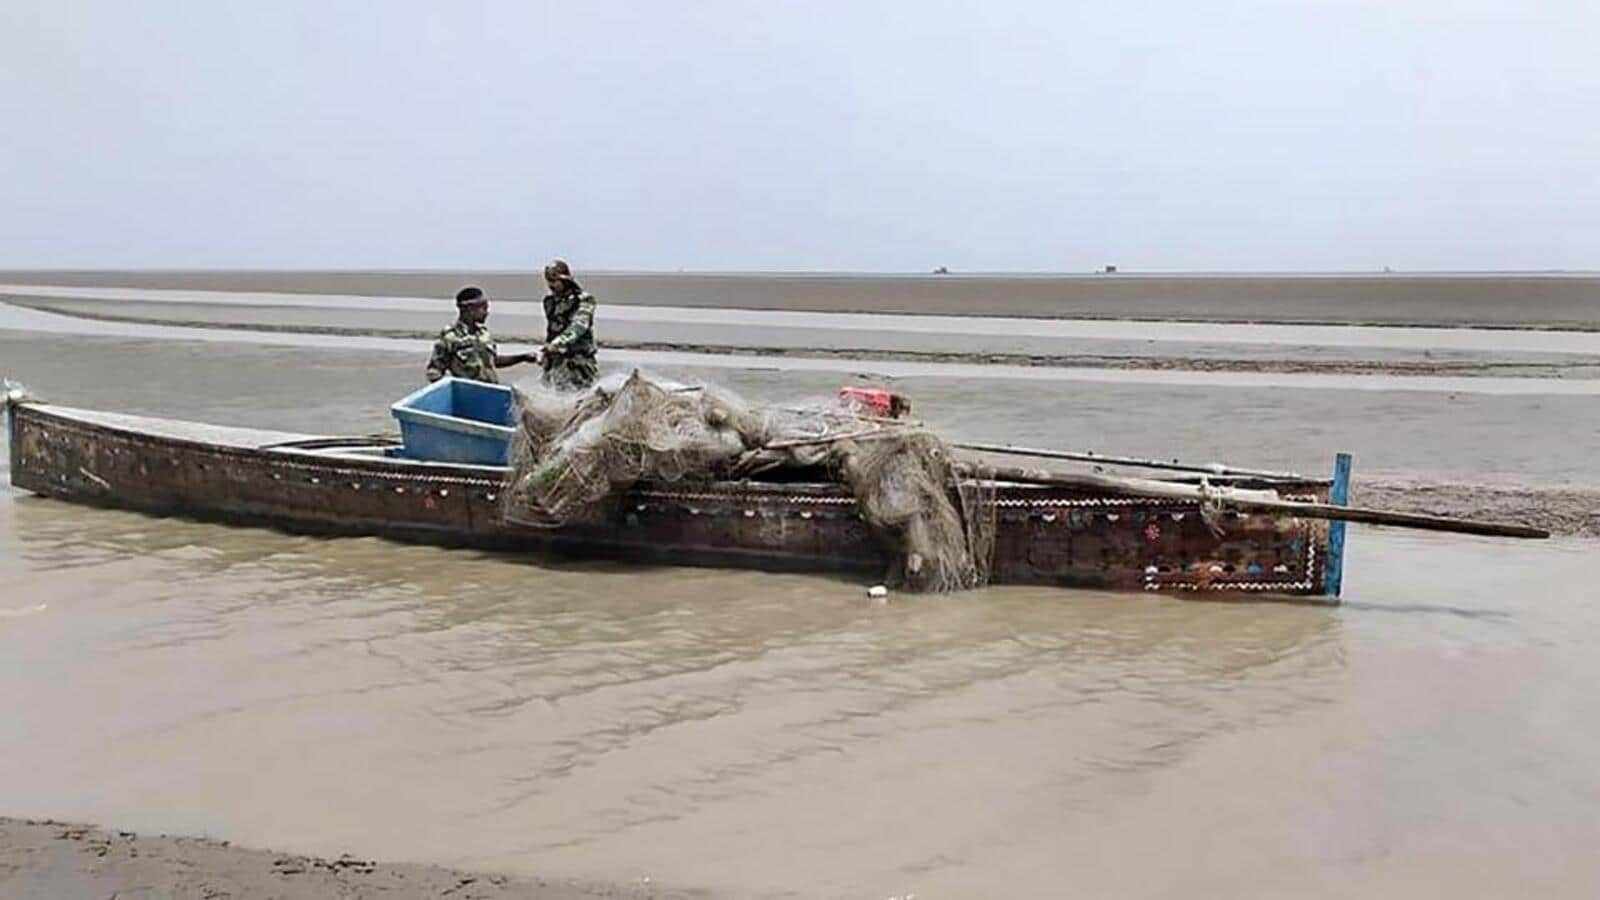 BSF launches search op after Pakistani fishing boat found abandoned in Kutch